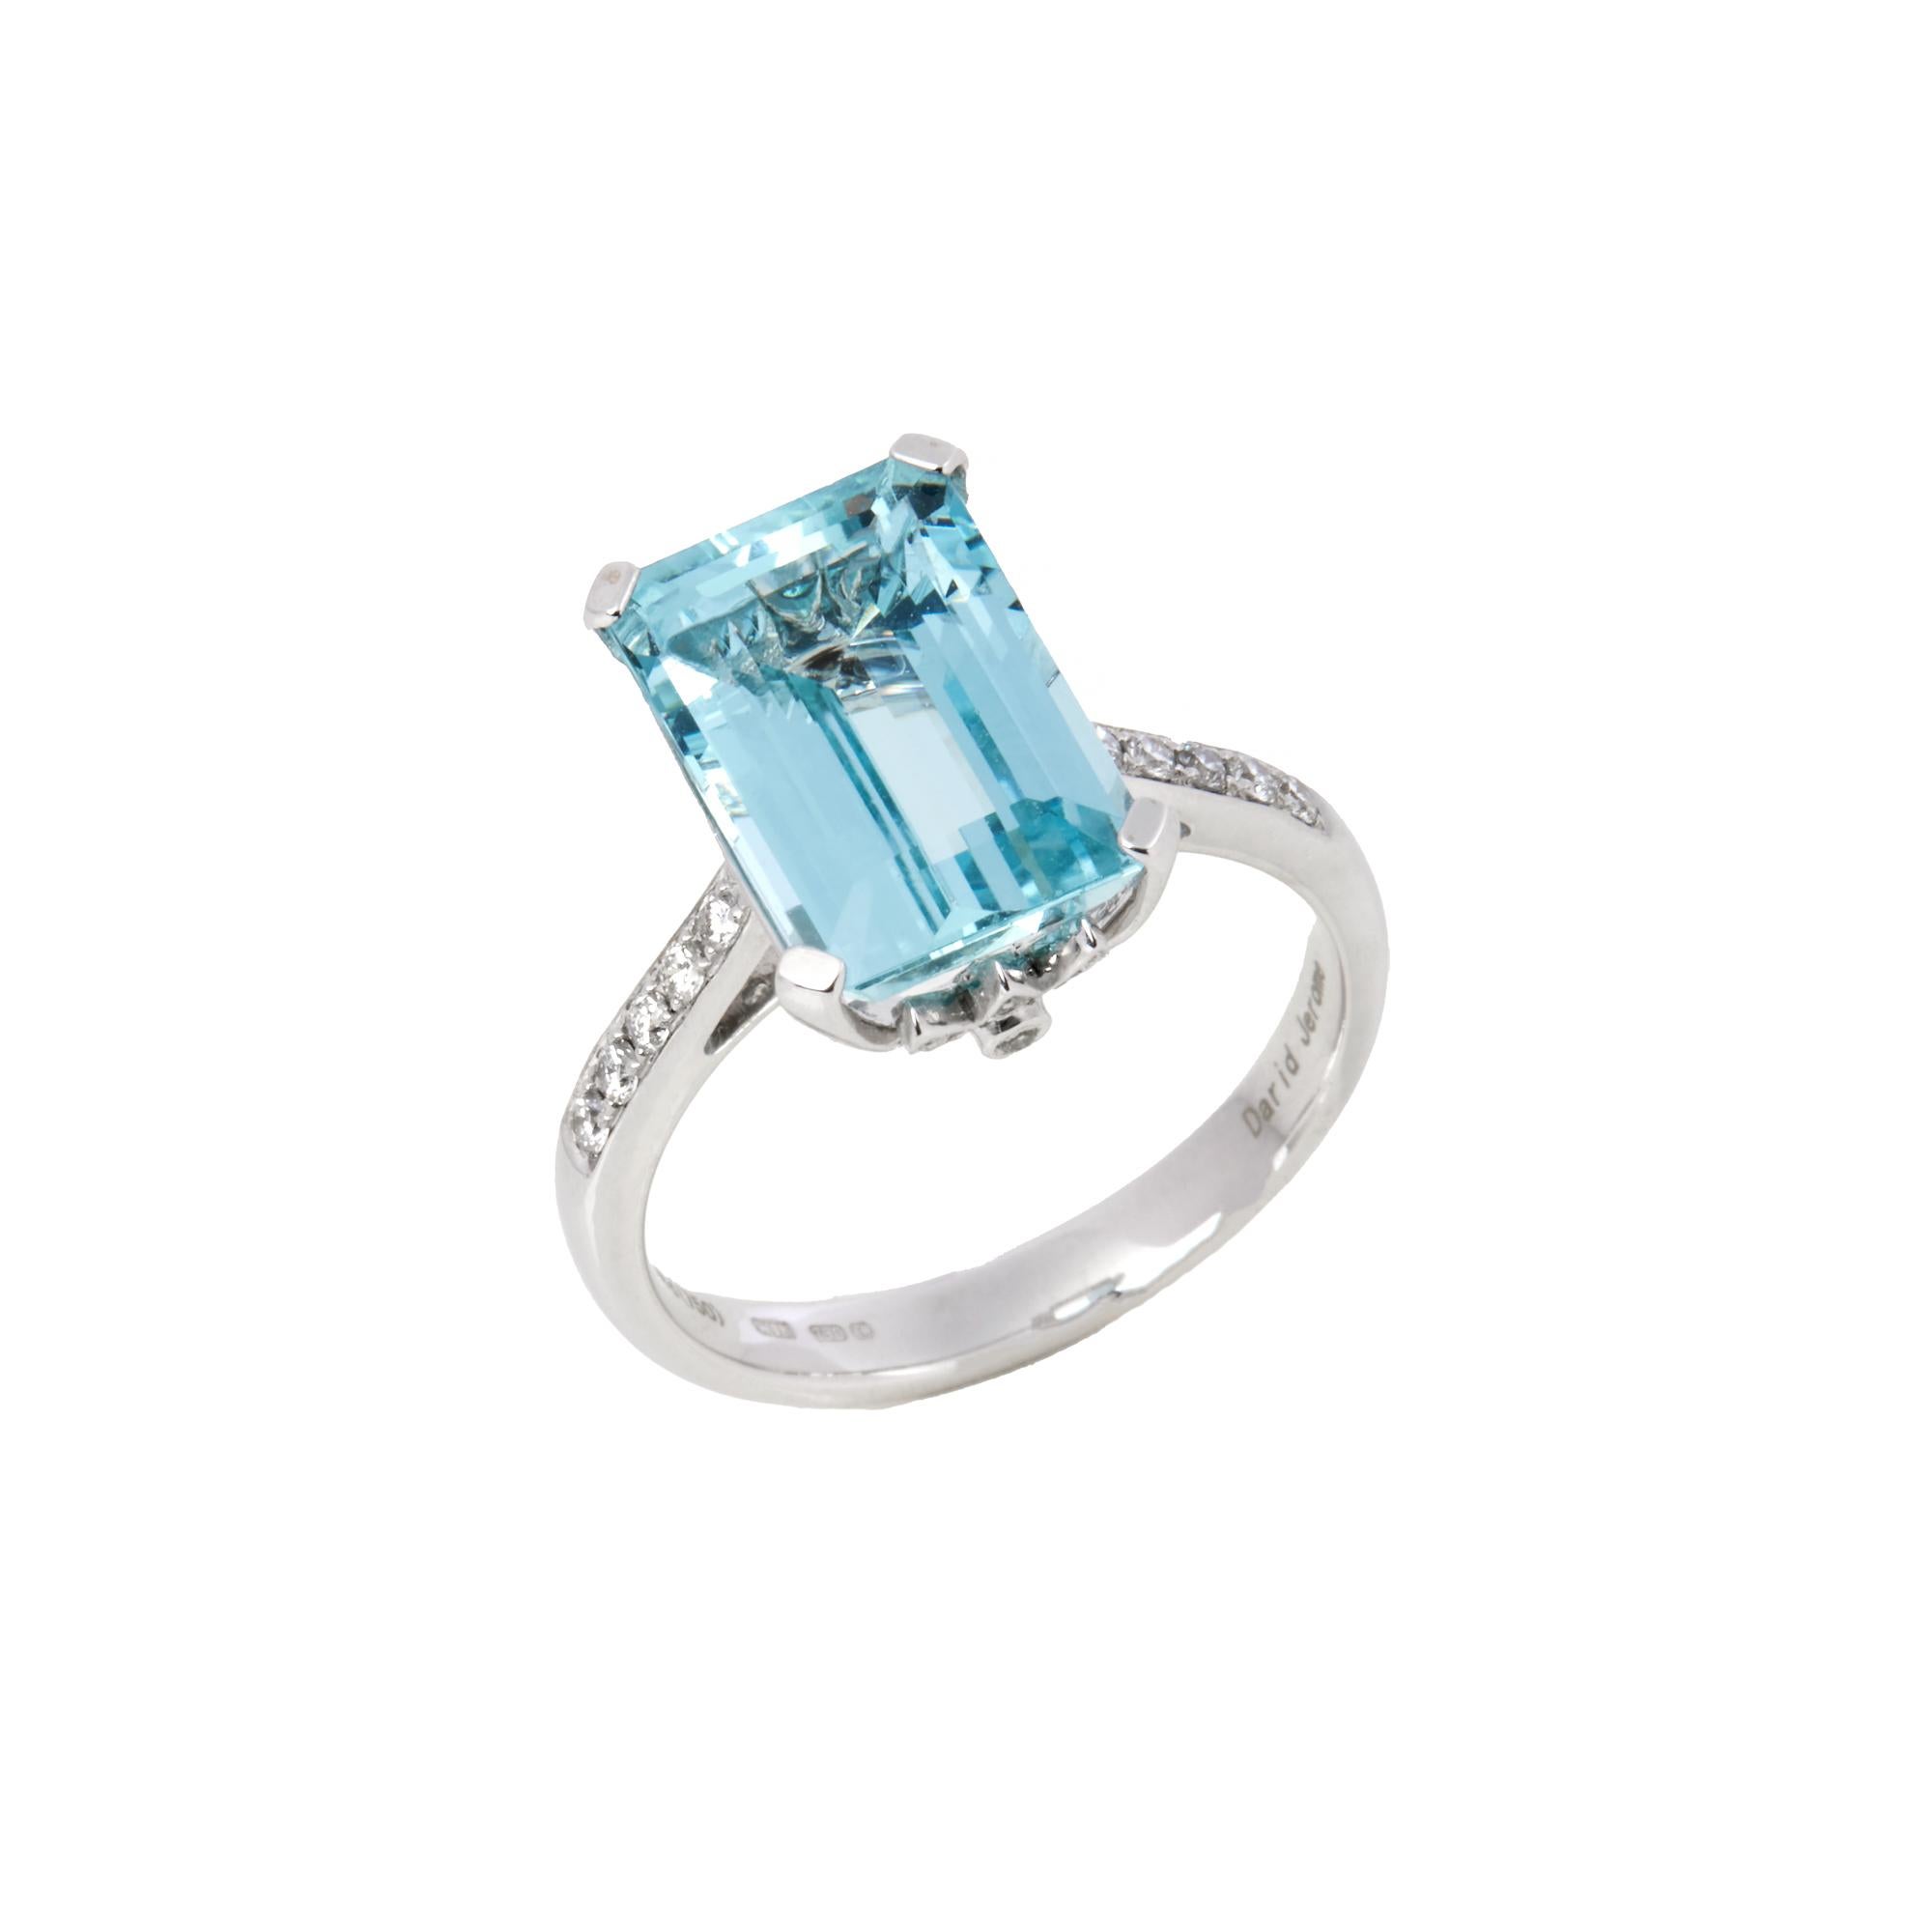 This ring is from the private collection of gemstone jewellery individually designed by David Jerome. It features an emerald cut aquamarine set with diamonds. Accompanied by an IGITL gem certificate. UK ring size N. EU ring size 54. US ring size 7. 